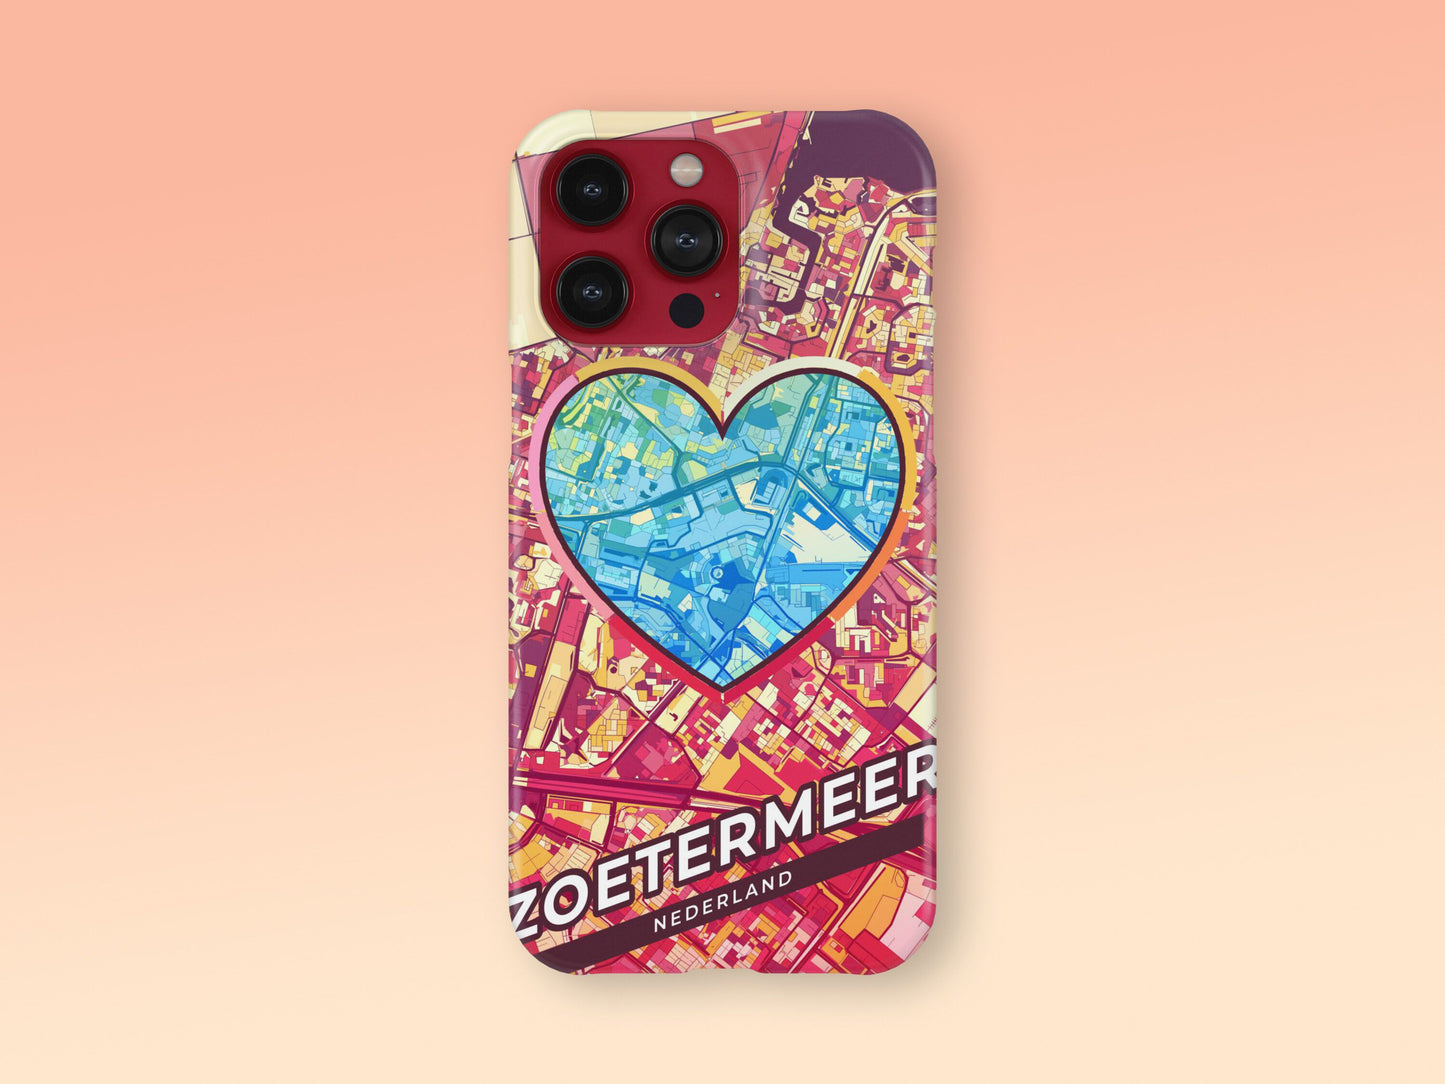 Zoetermeer Netherlands slim phone case with colorful icon 2